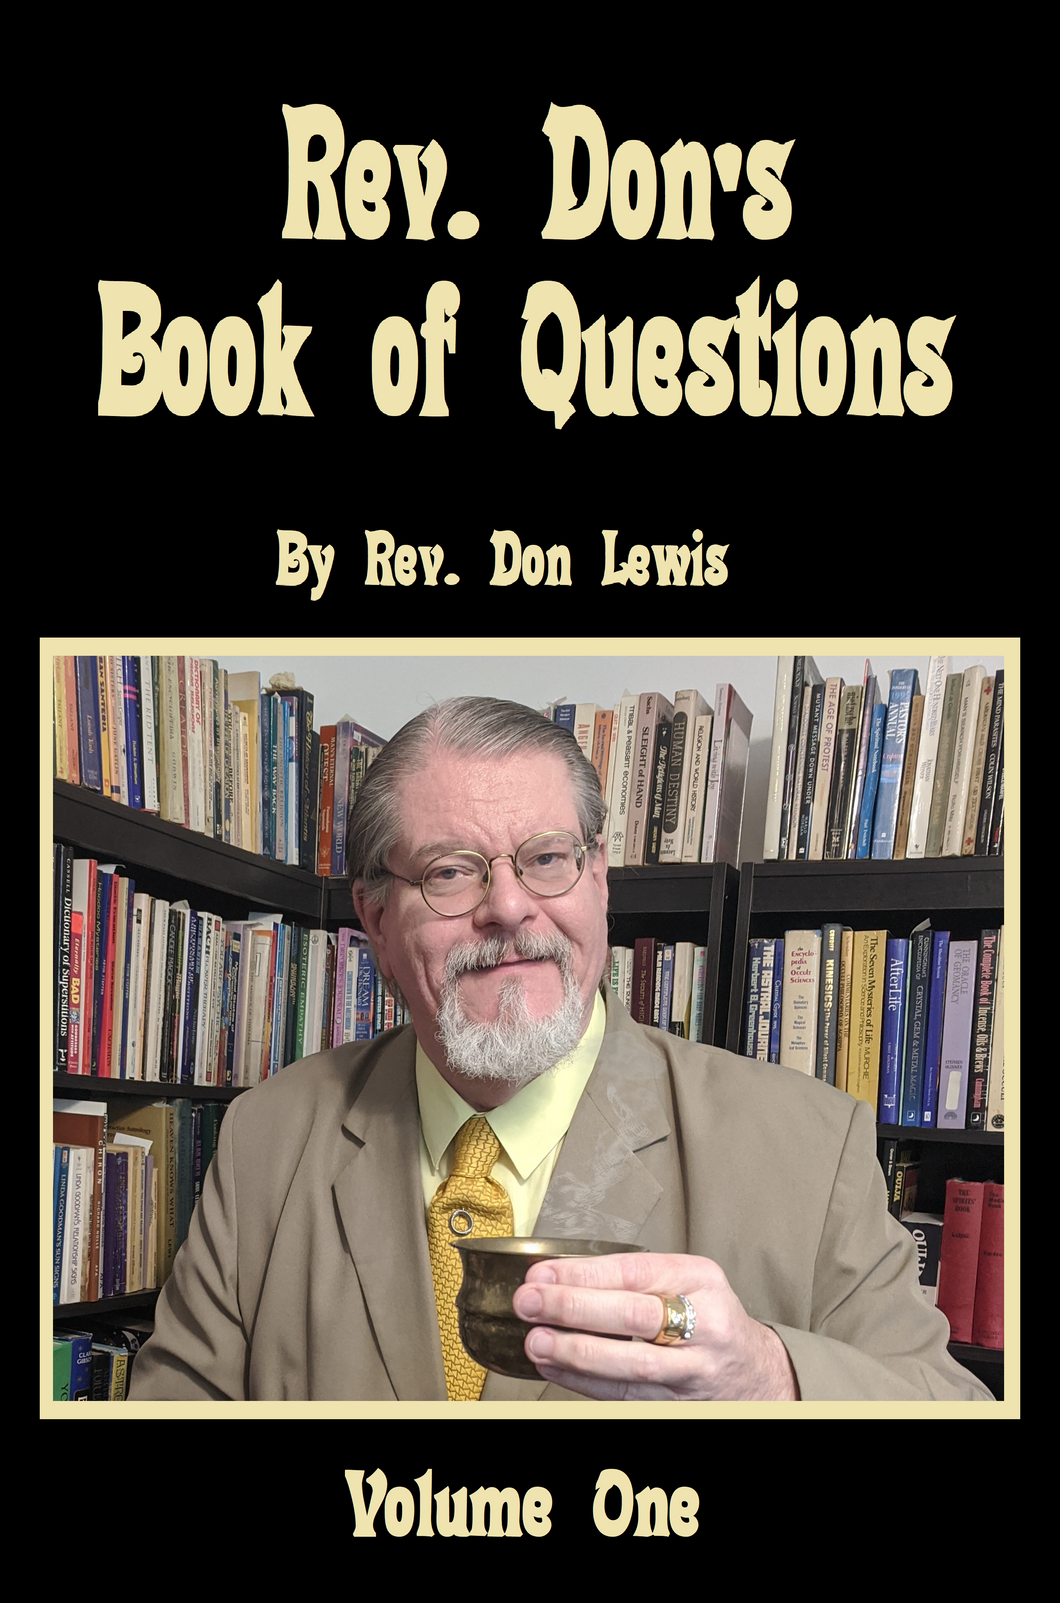 Rev. Don's Book of Questions, Volume I